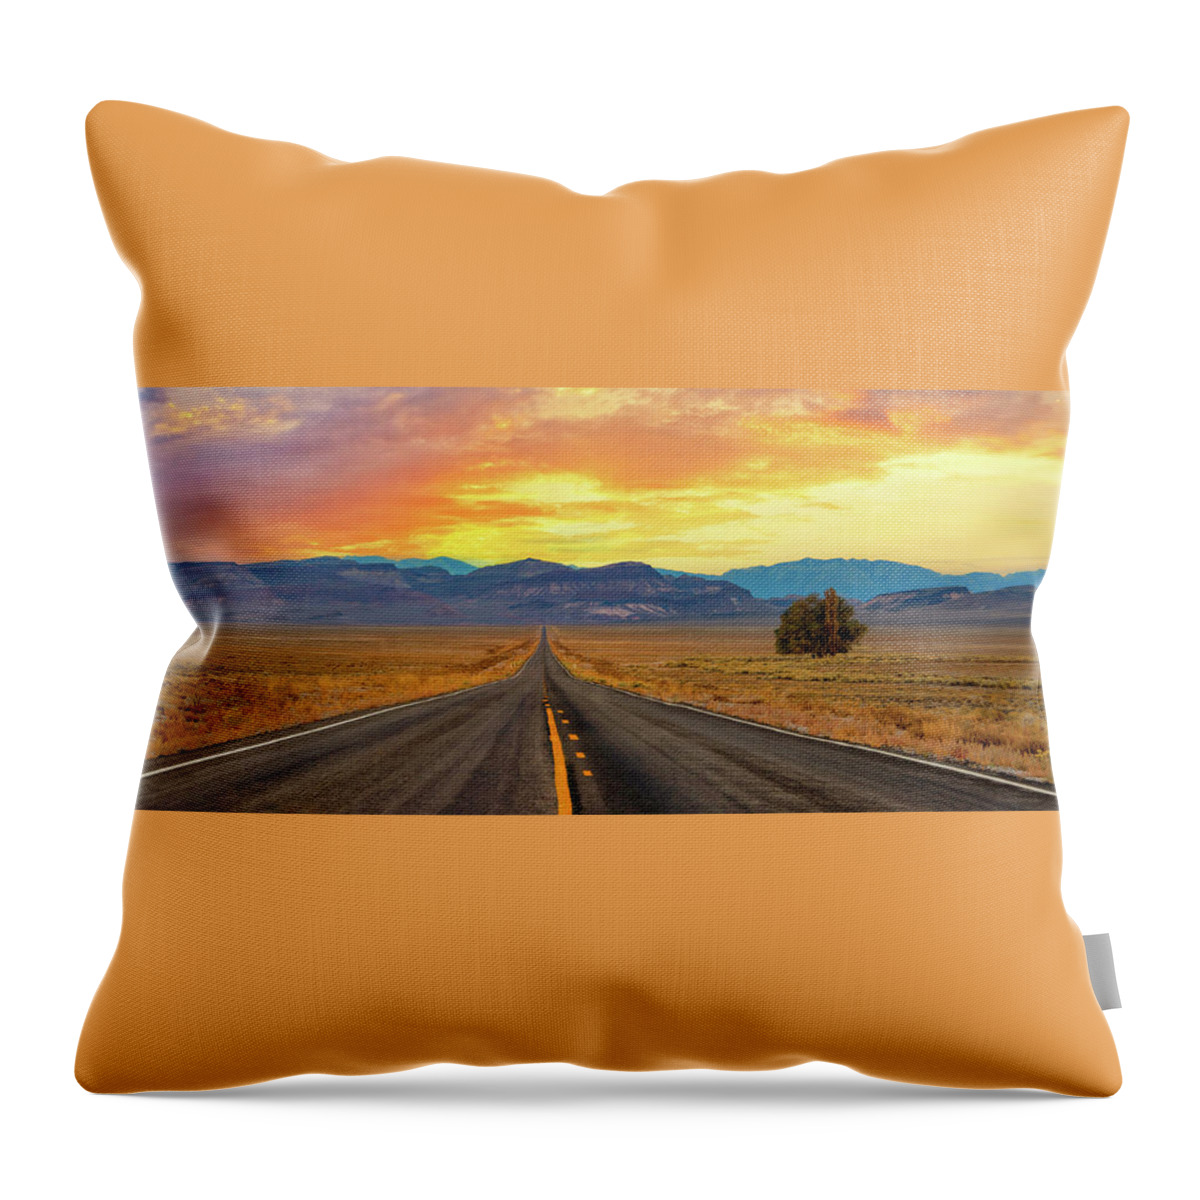 Utah Throw Pillow featuring the photograph Road To The Mountains Pano by Ali Nasser